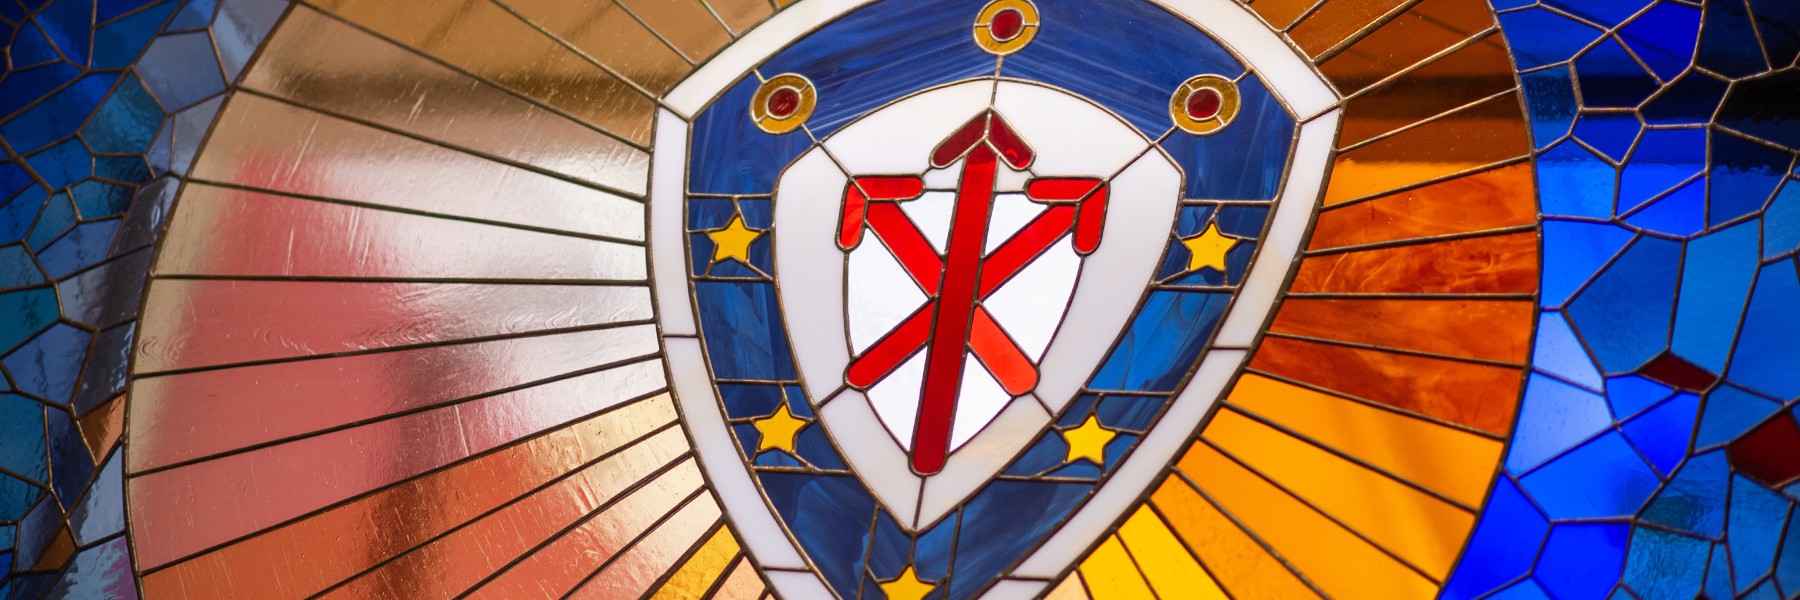 College of Arts and Sciences shield design in stained glass